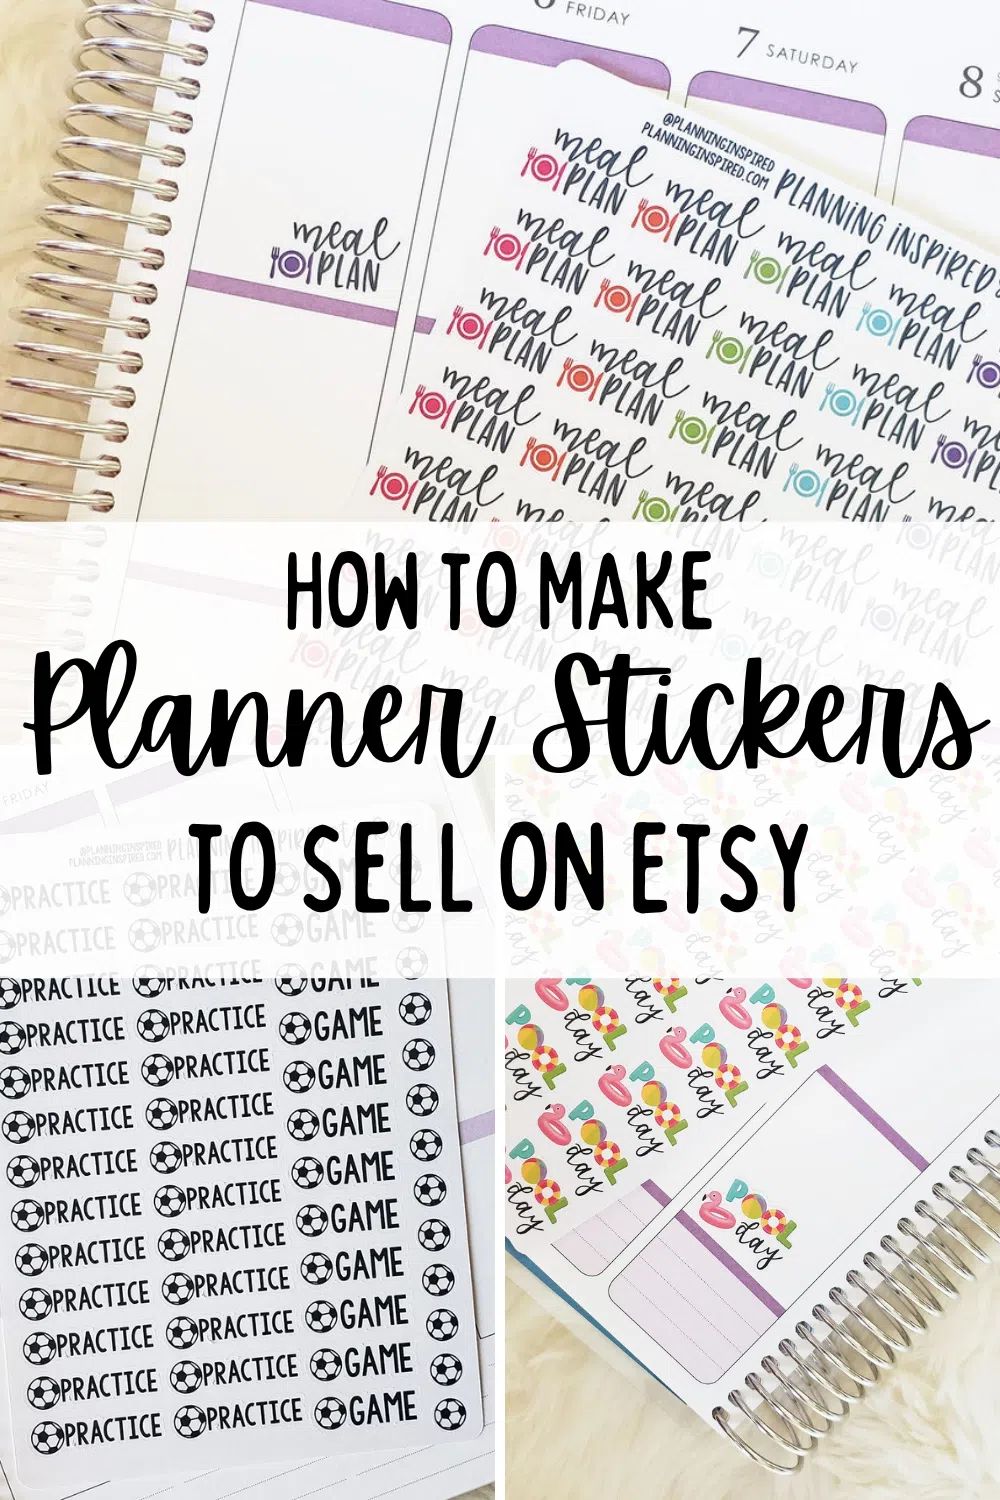 How to Make Planner Stickers to Sell on Etsy